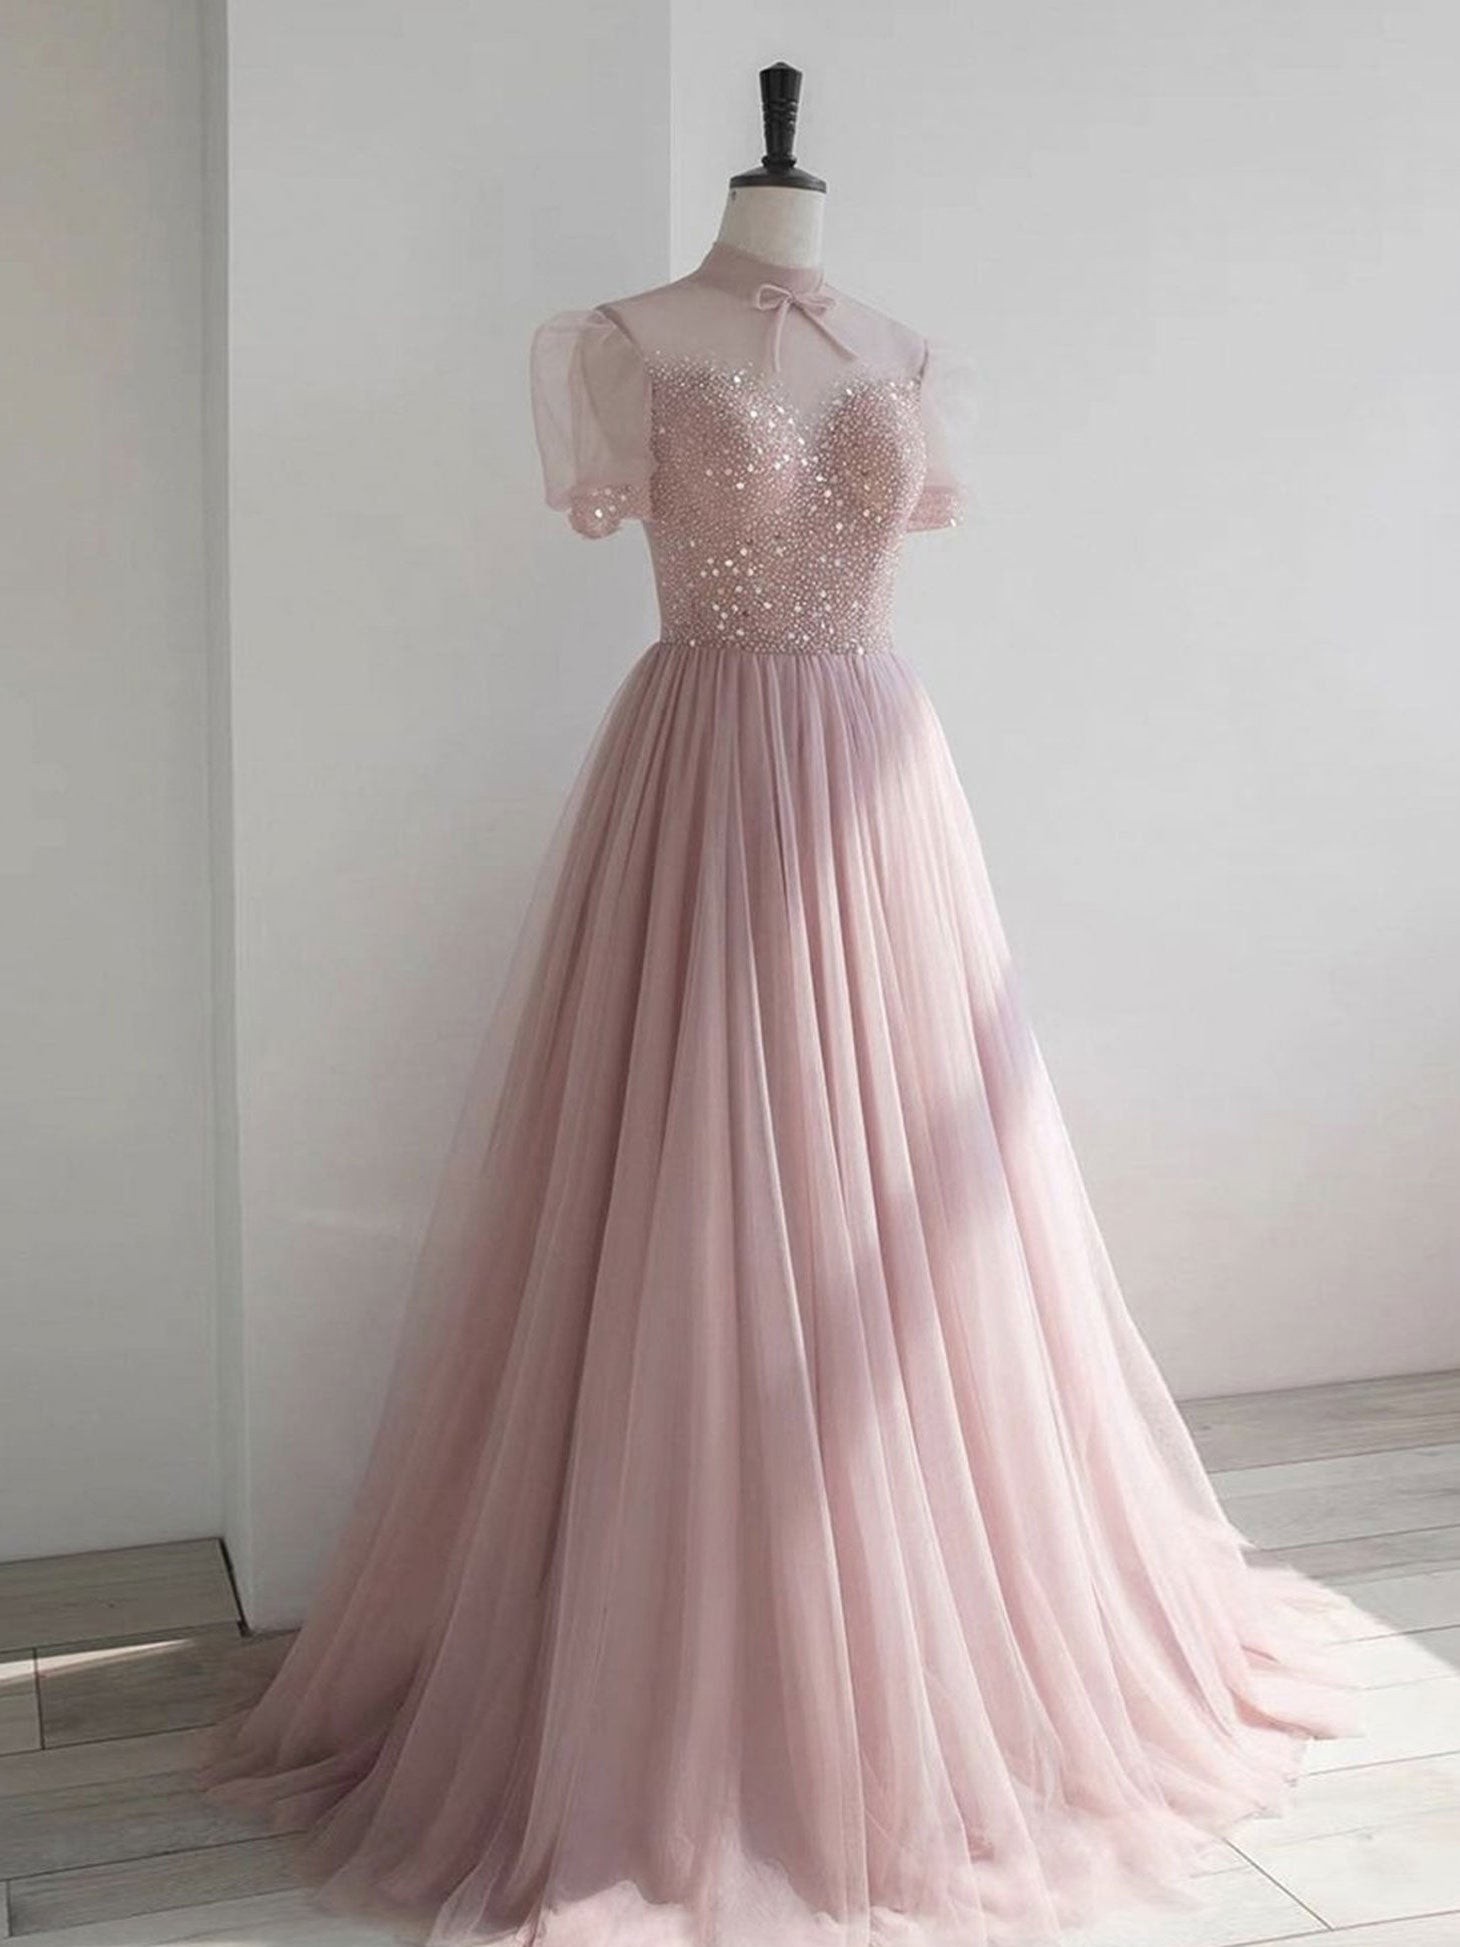 Homecoming Dress Inspo, Pink round neck tulle sequin long prom dress, pink tulle formal dress